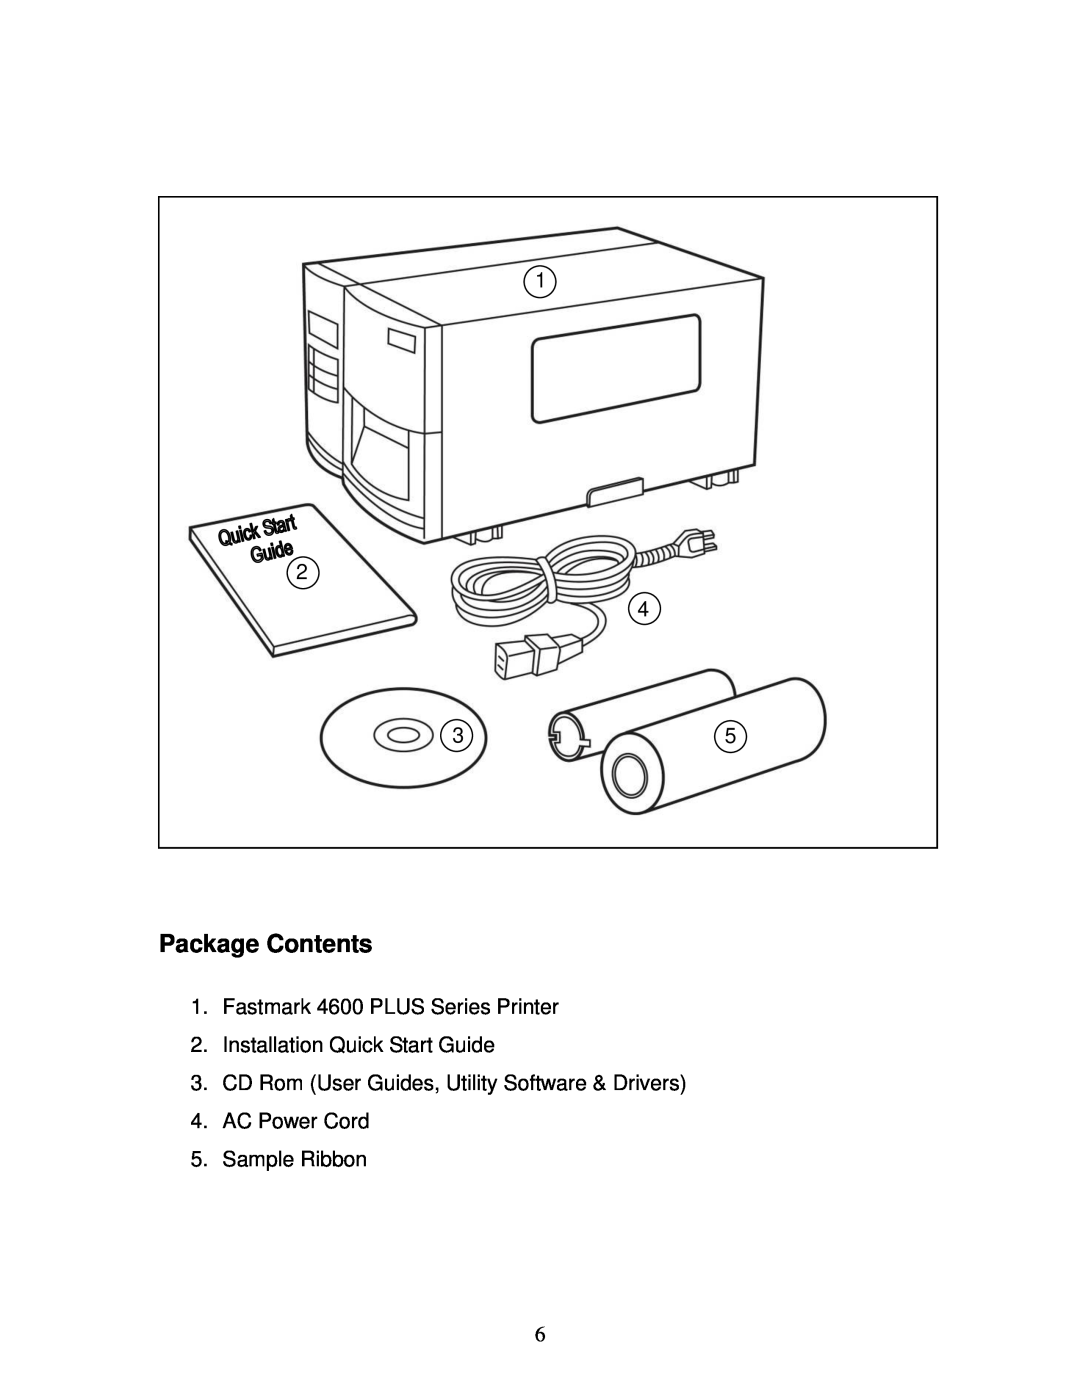 AMT Datasouth manual Package Contents, Fastmark 4600 PLUS Series Printer, Installation Quick Start Guide, Sample Ribbon 